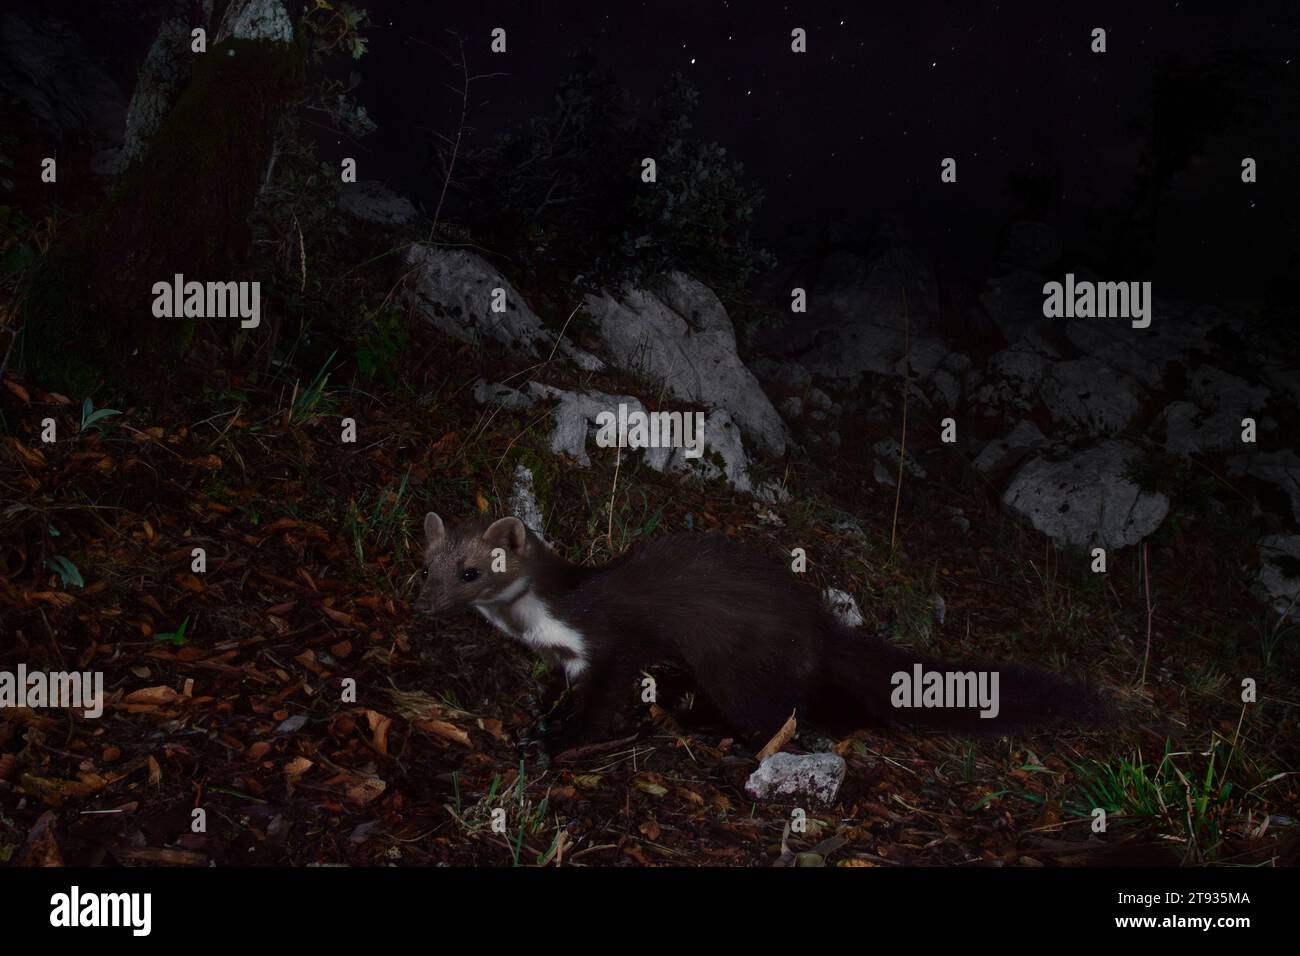 Beech Marten (Martes foina), side view of an adult standing on the ground at night, Campania, Italy Stock Photo